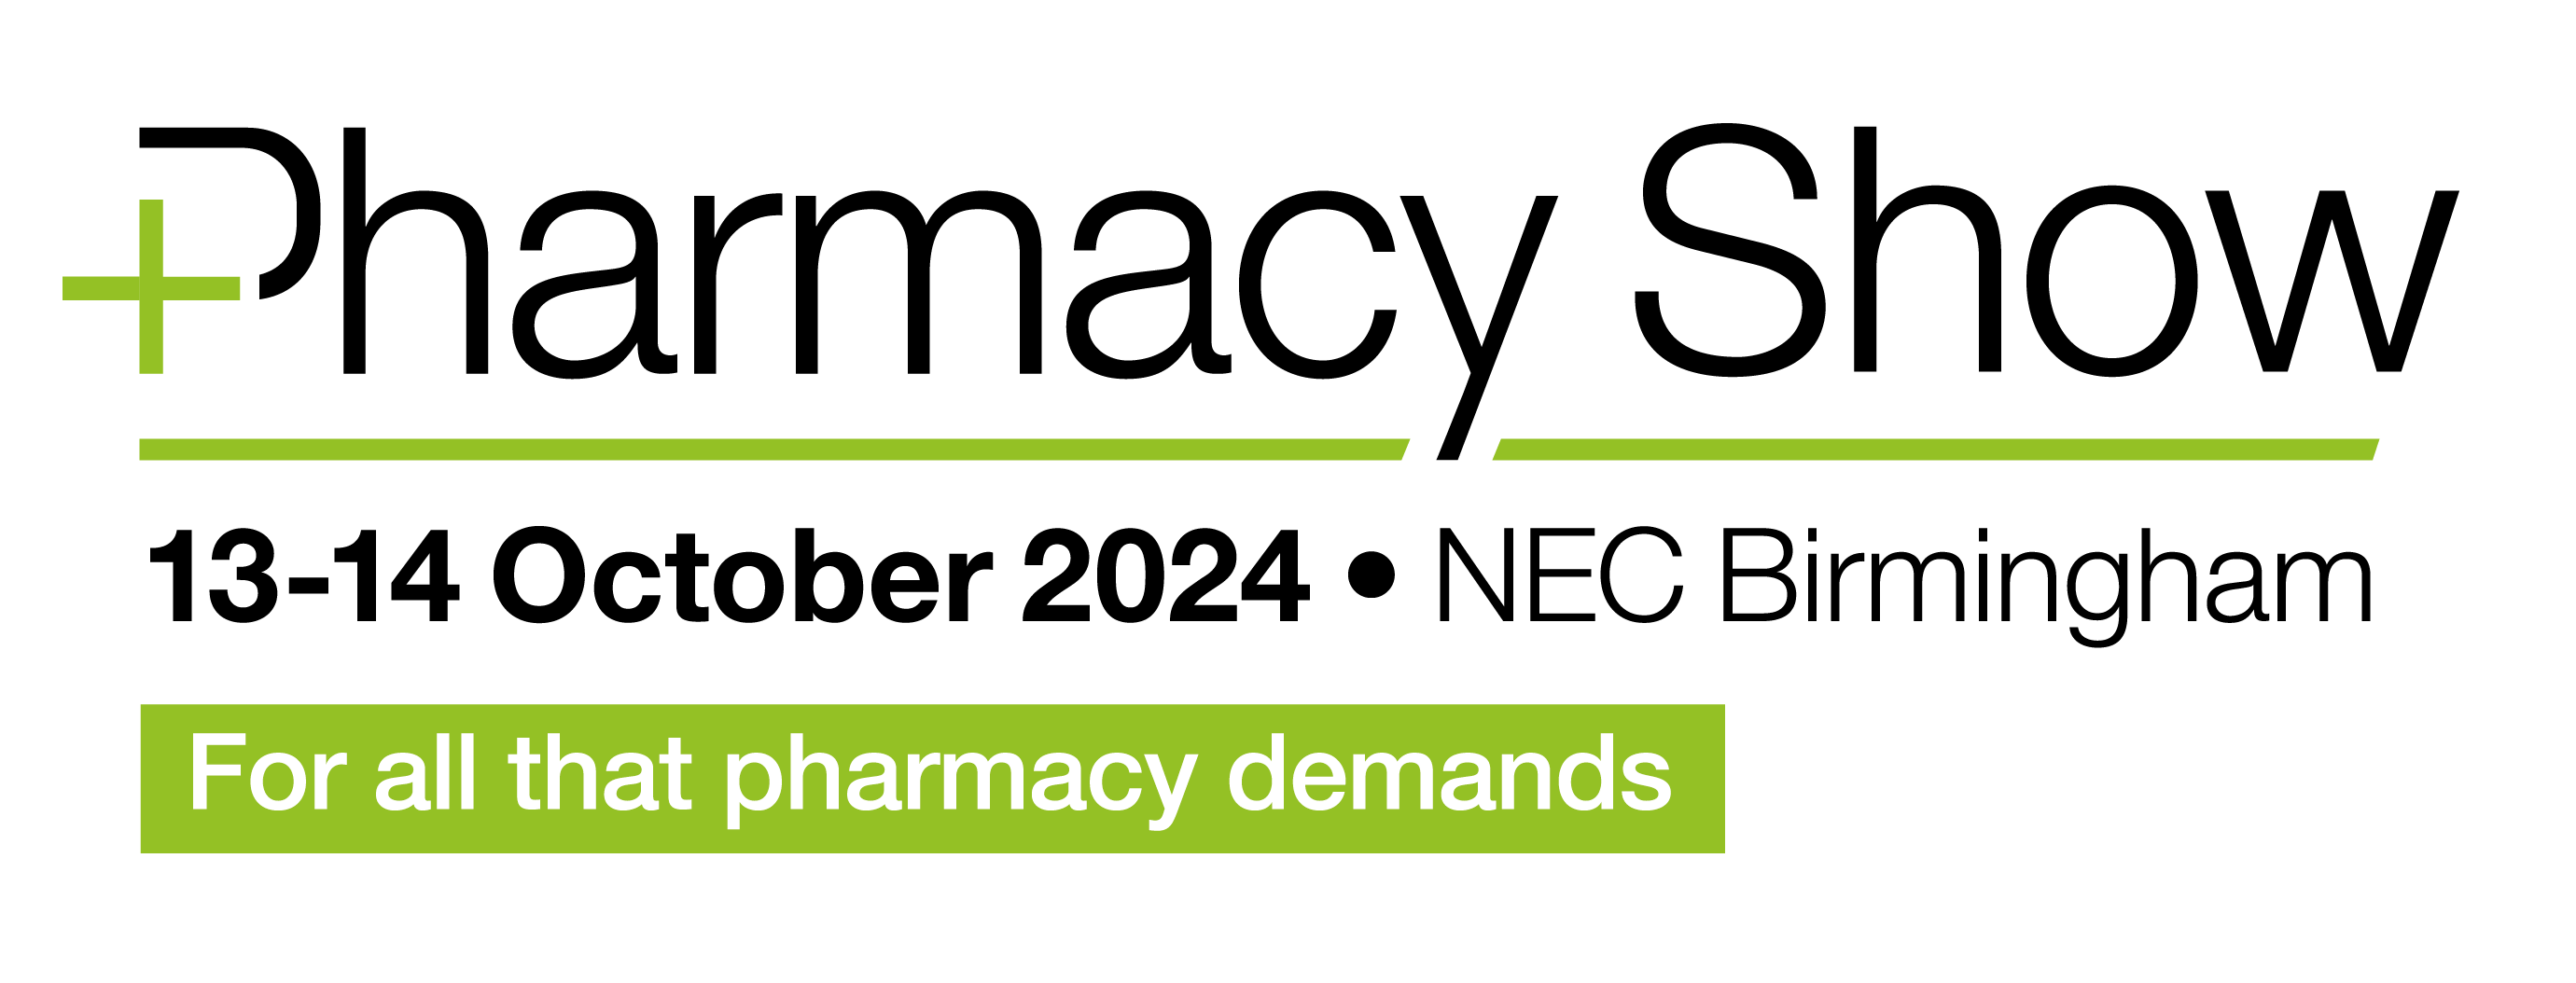 Meducate Academy contributes expertise to The Pharmacy Show, offering interactive workshops that empower pharmacists to handle patient challenges effectively